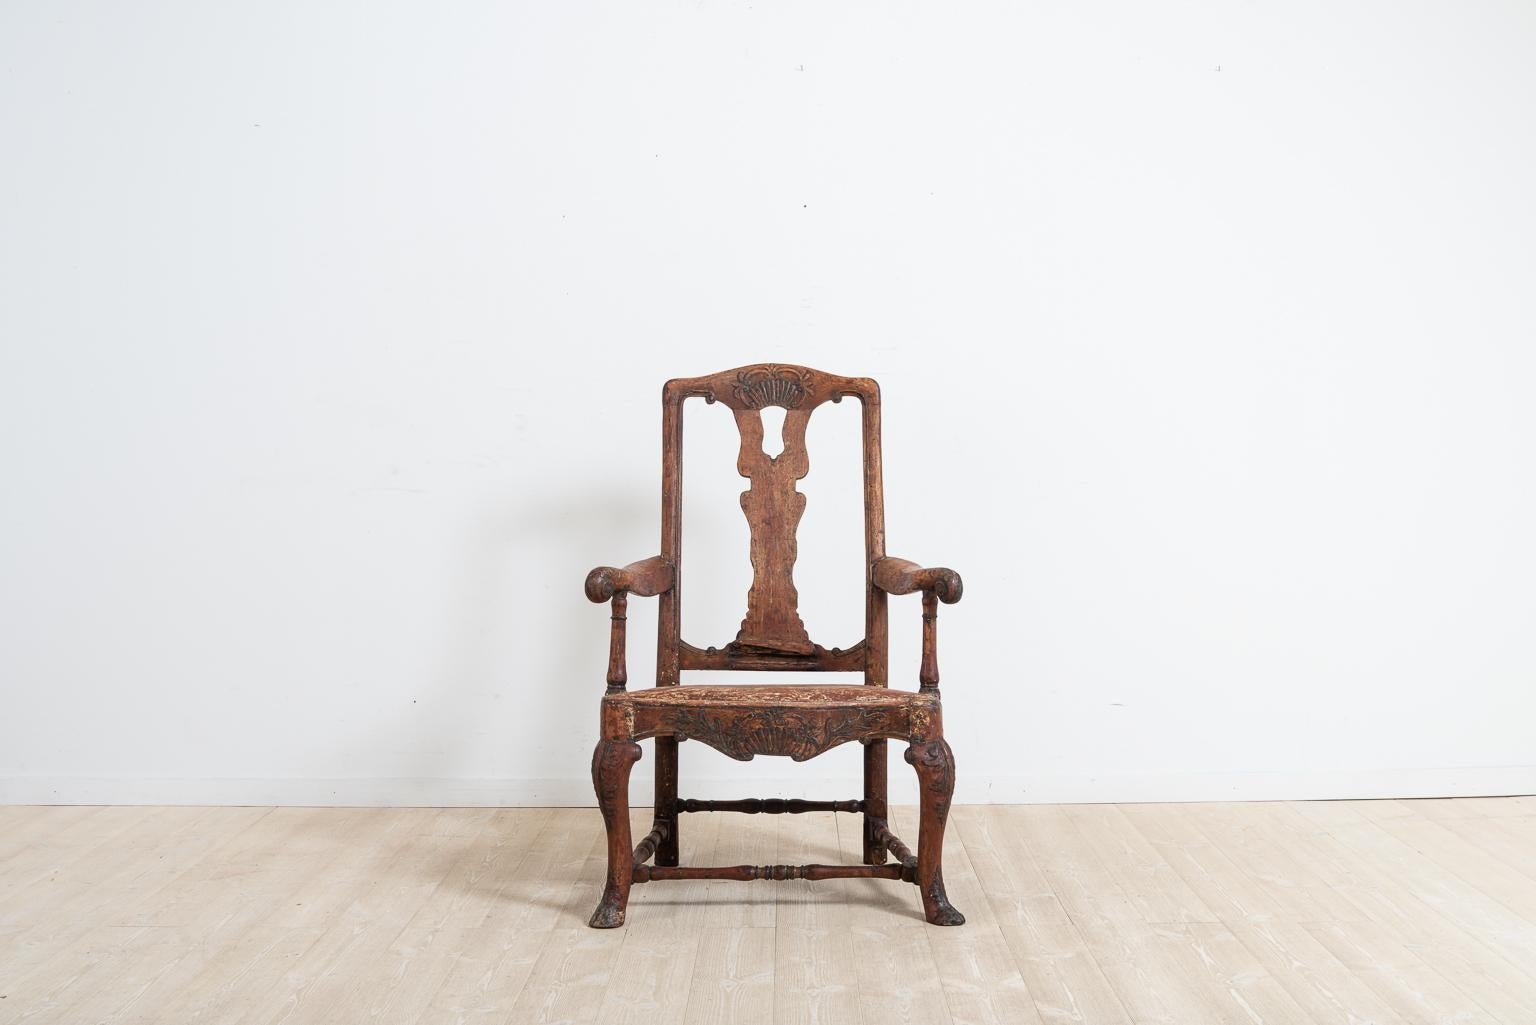 Hand-Crafted Mid-18th Century Swedish Baroque Armchair